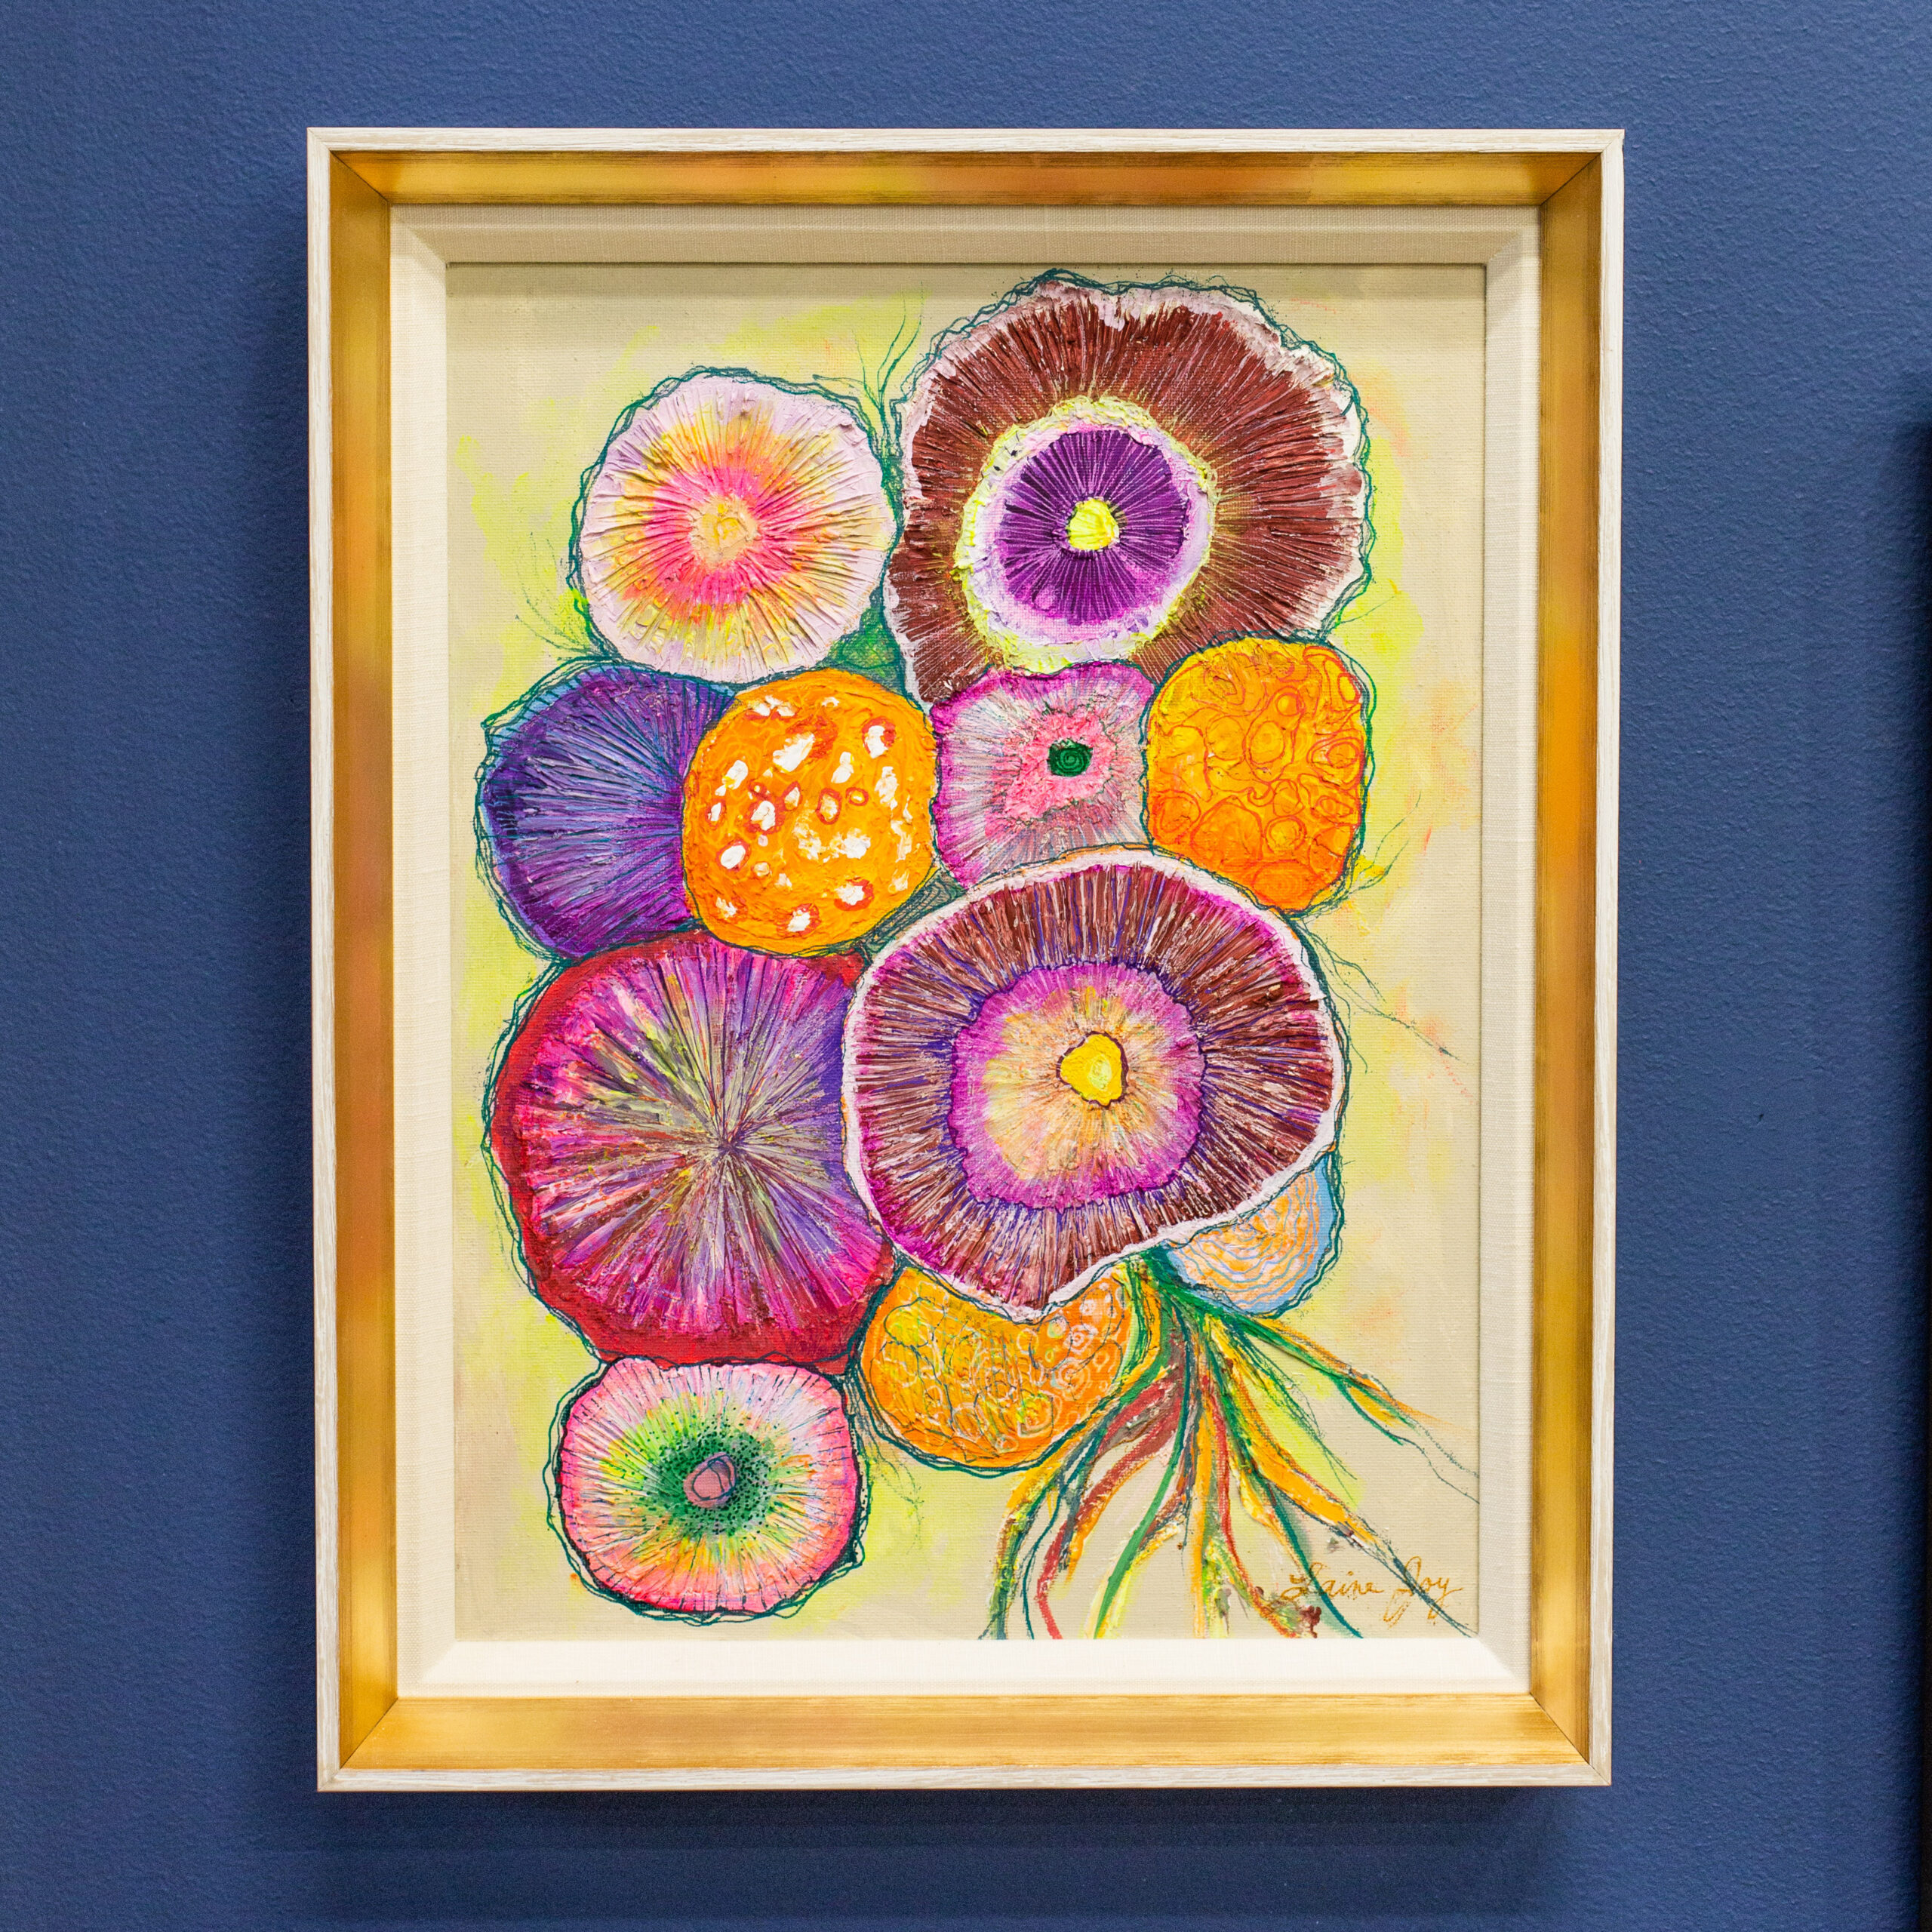 A closeup of a beautiful, colorful painting of a bouquet framed in a white and light brown frame. The painting hangs from a blue gallery wall.